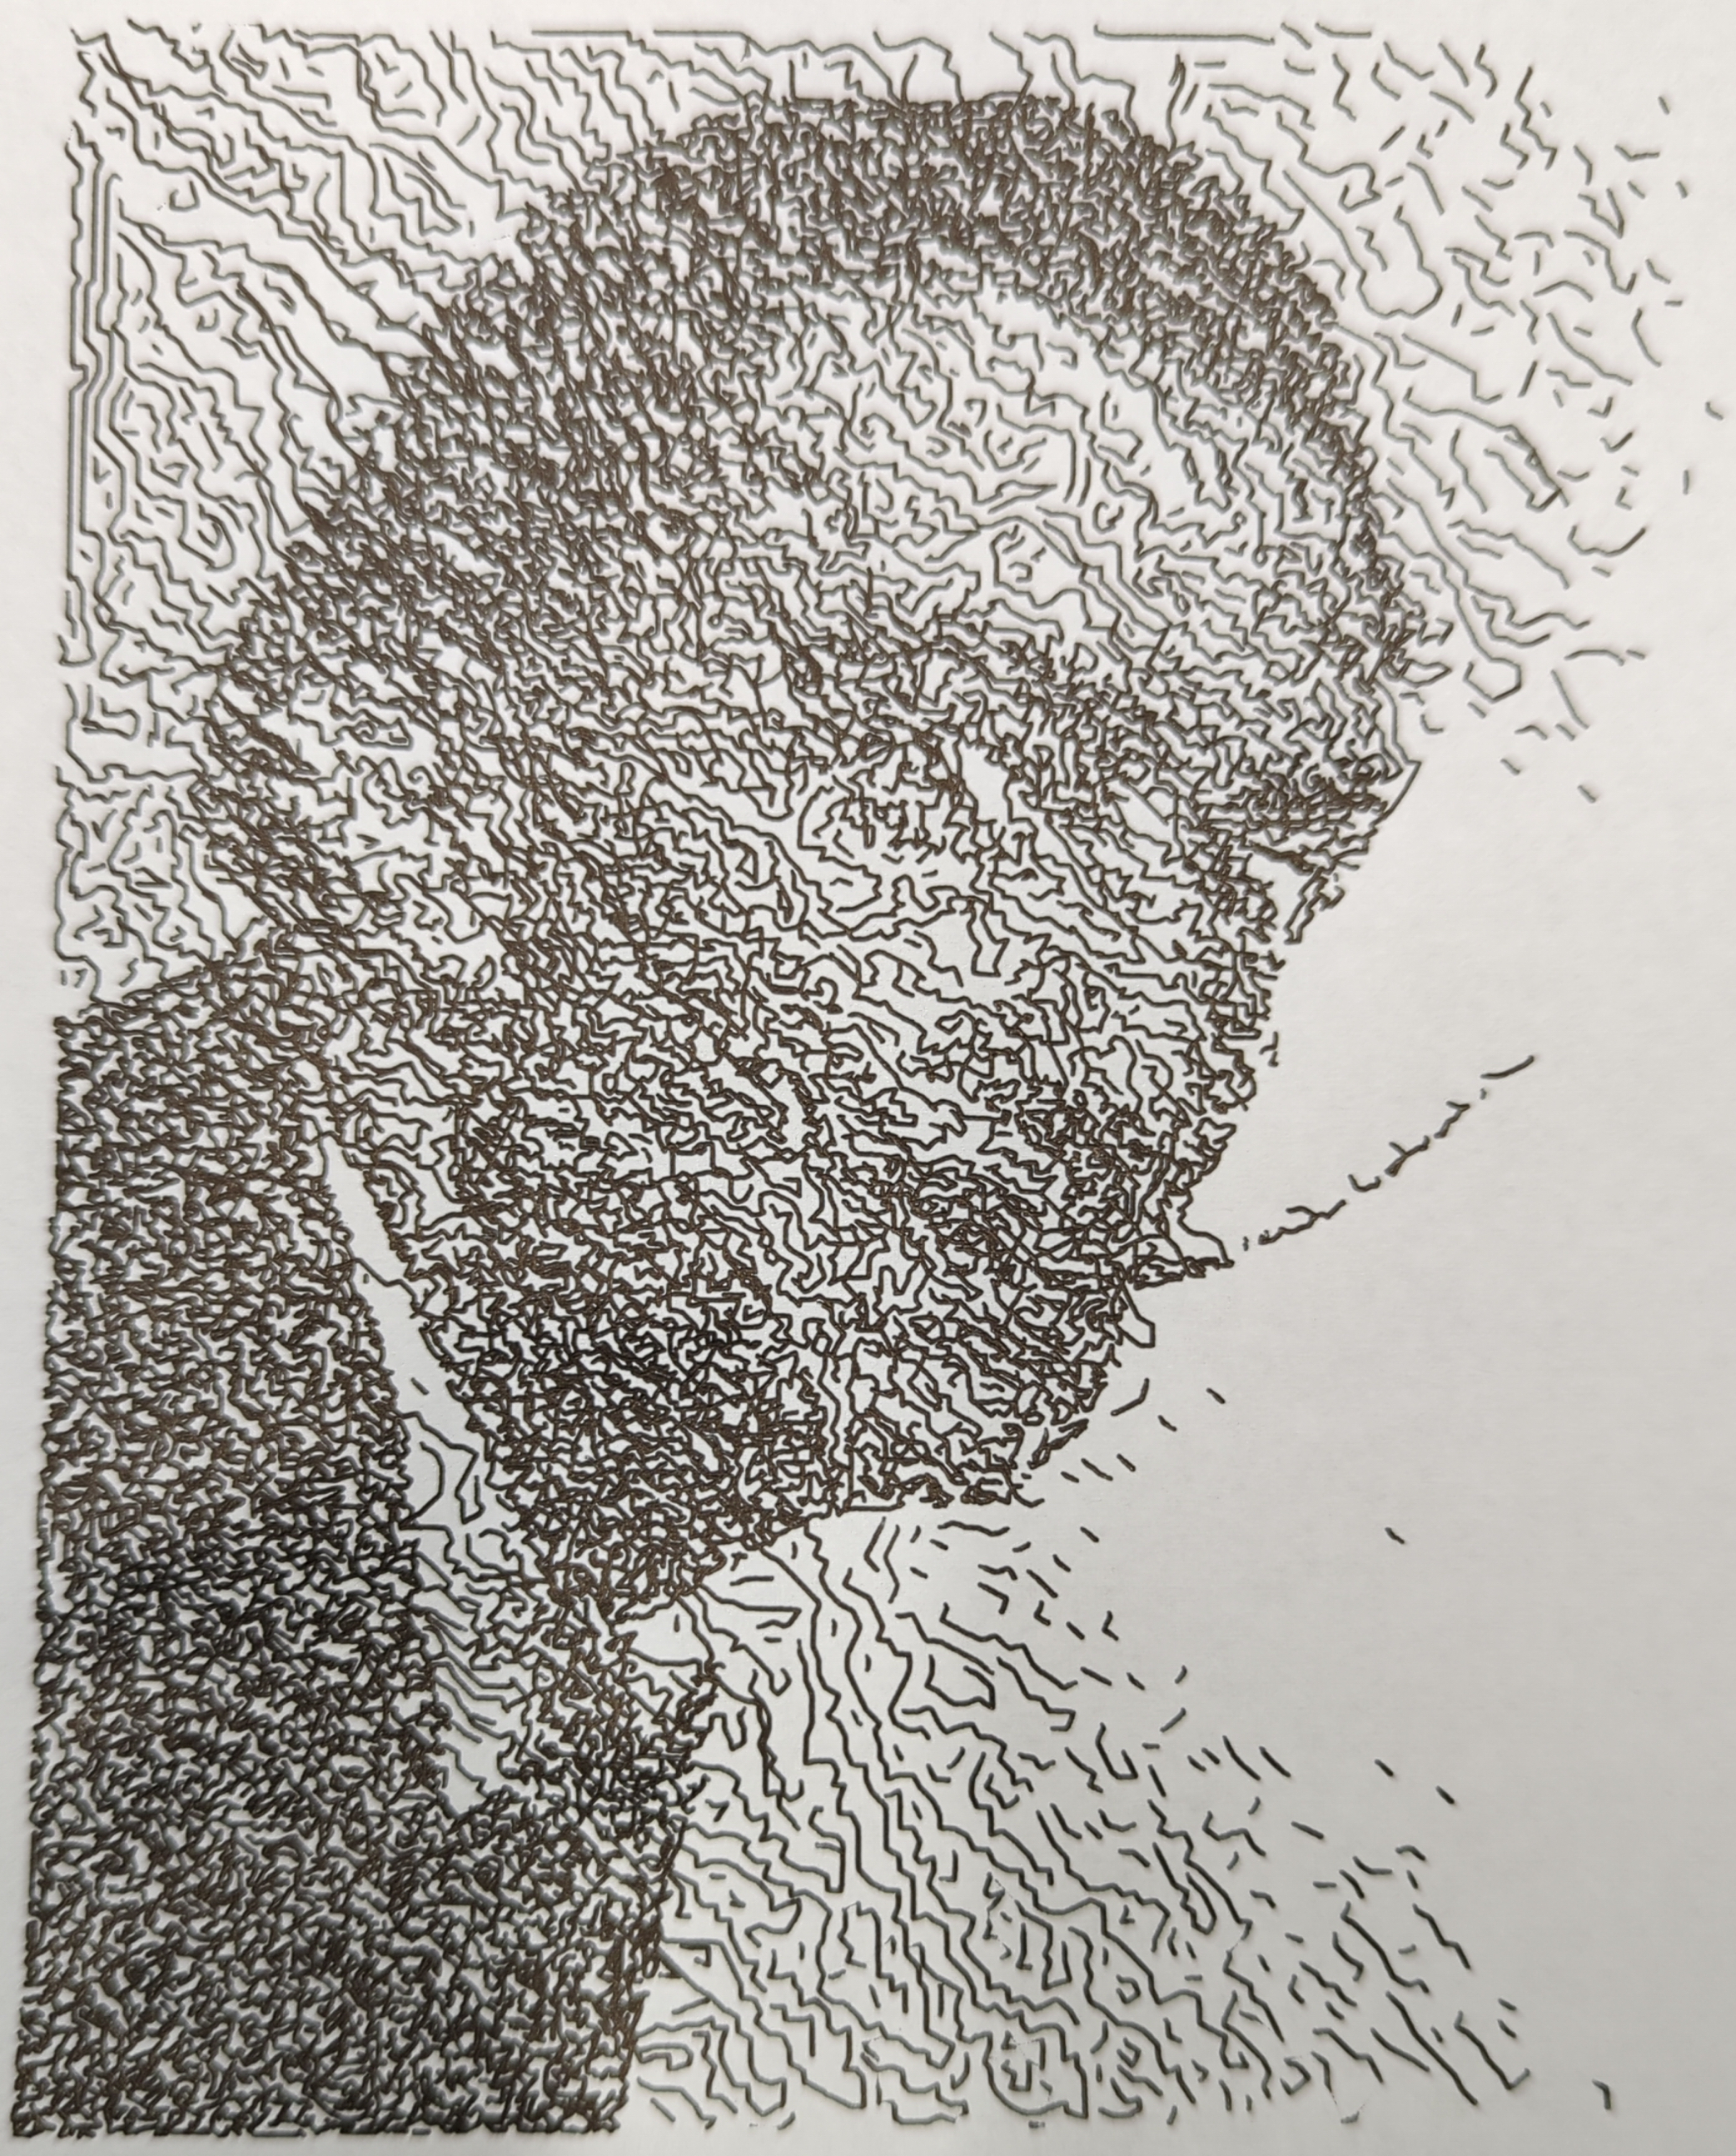 A popular photo of Salvador Dali as portrayed by a pen plotter